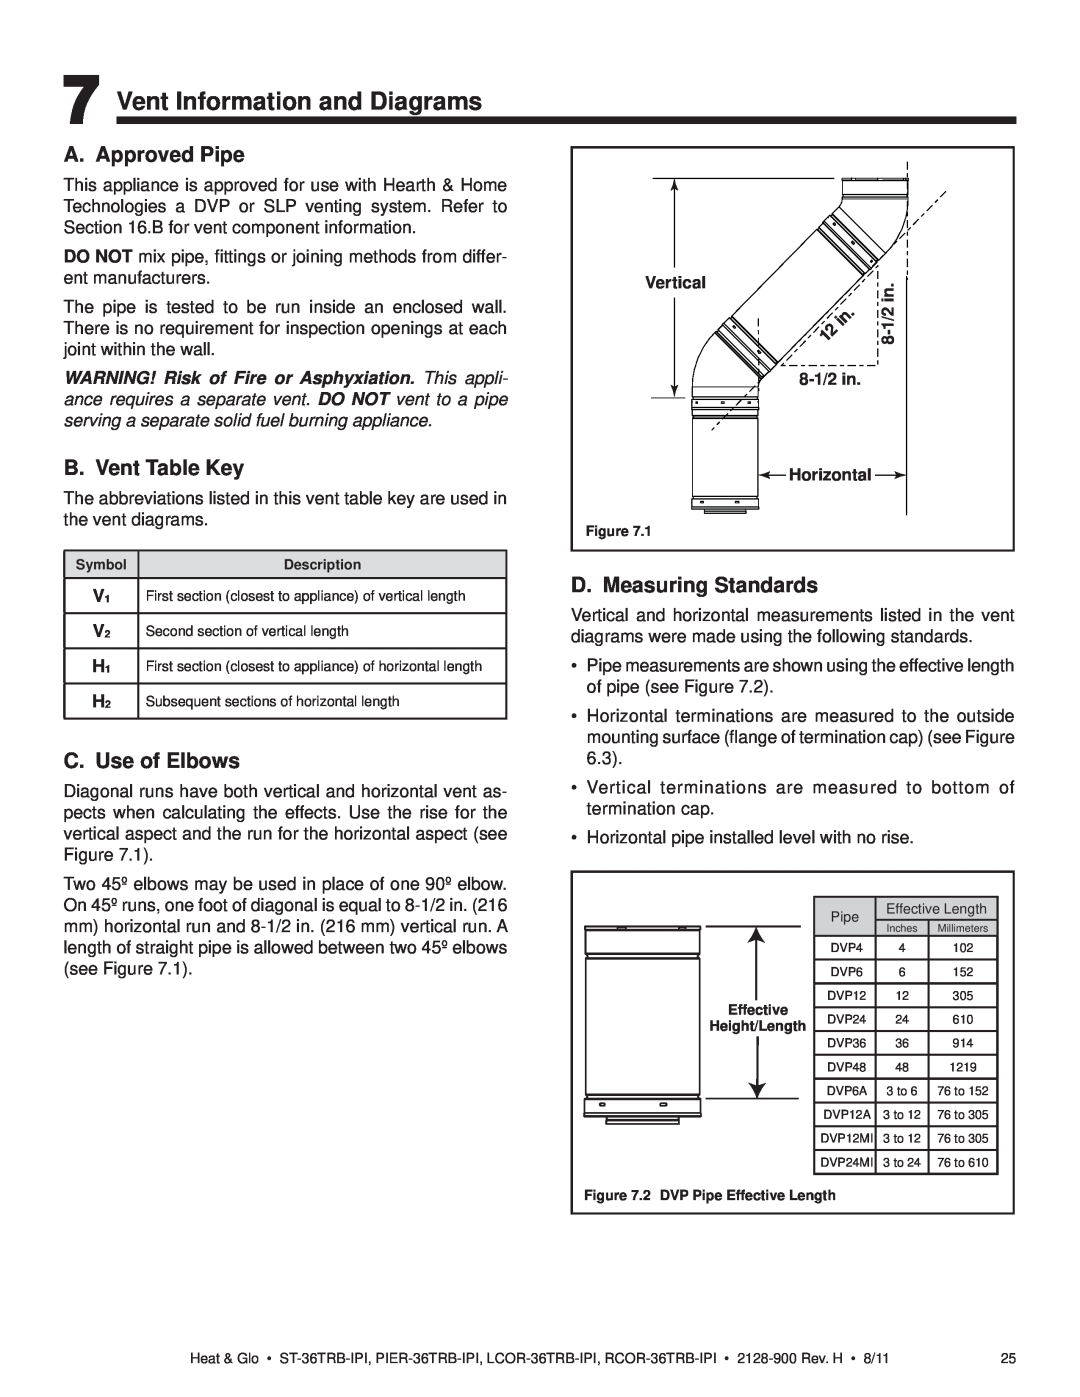 Heat & Glo LifeStyle ST-36TRB-IPI Vent Information and Diagrams, A. Approved Pipe, B. Vent Table Key, C. Use of Elbows 